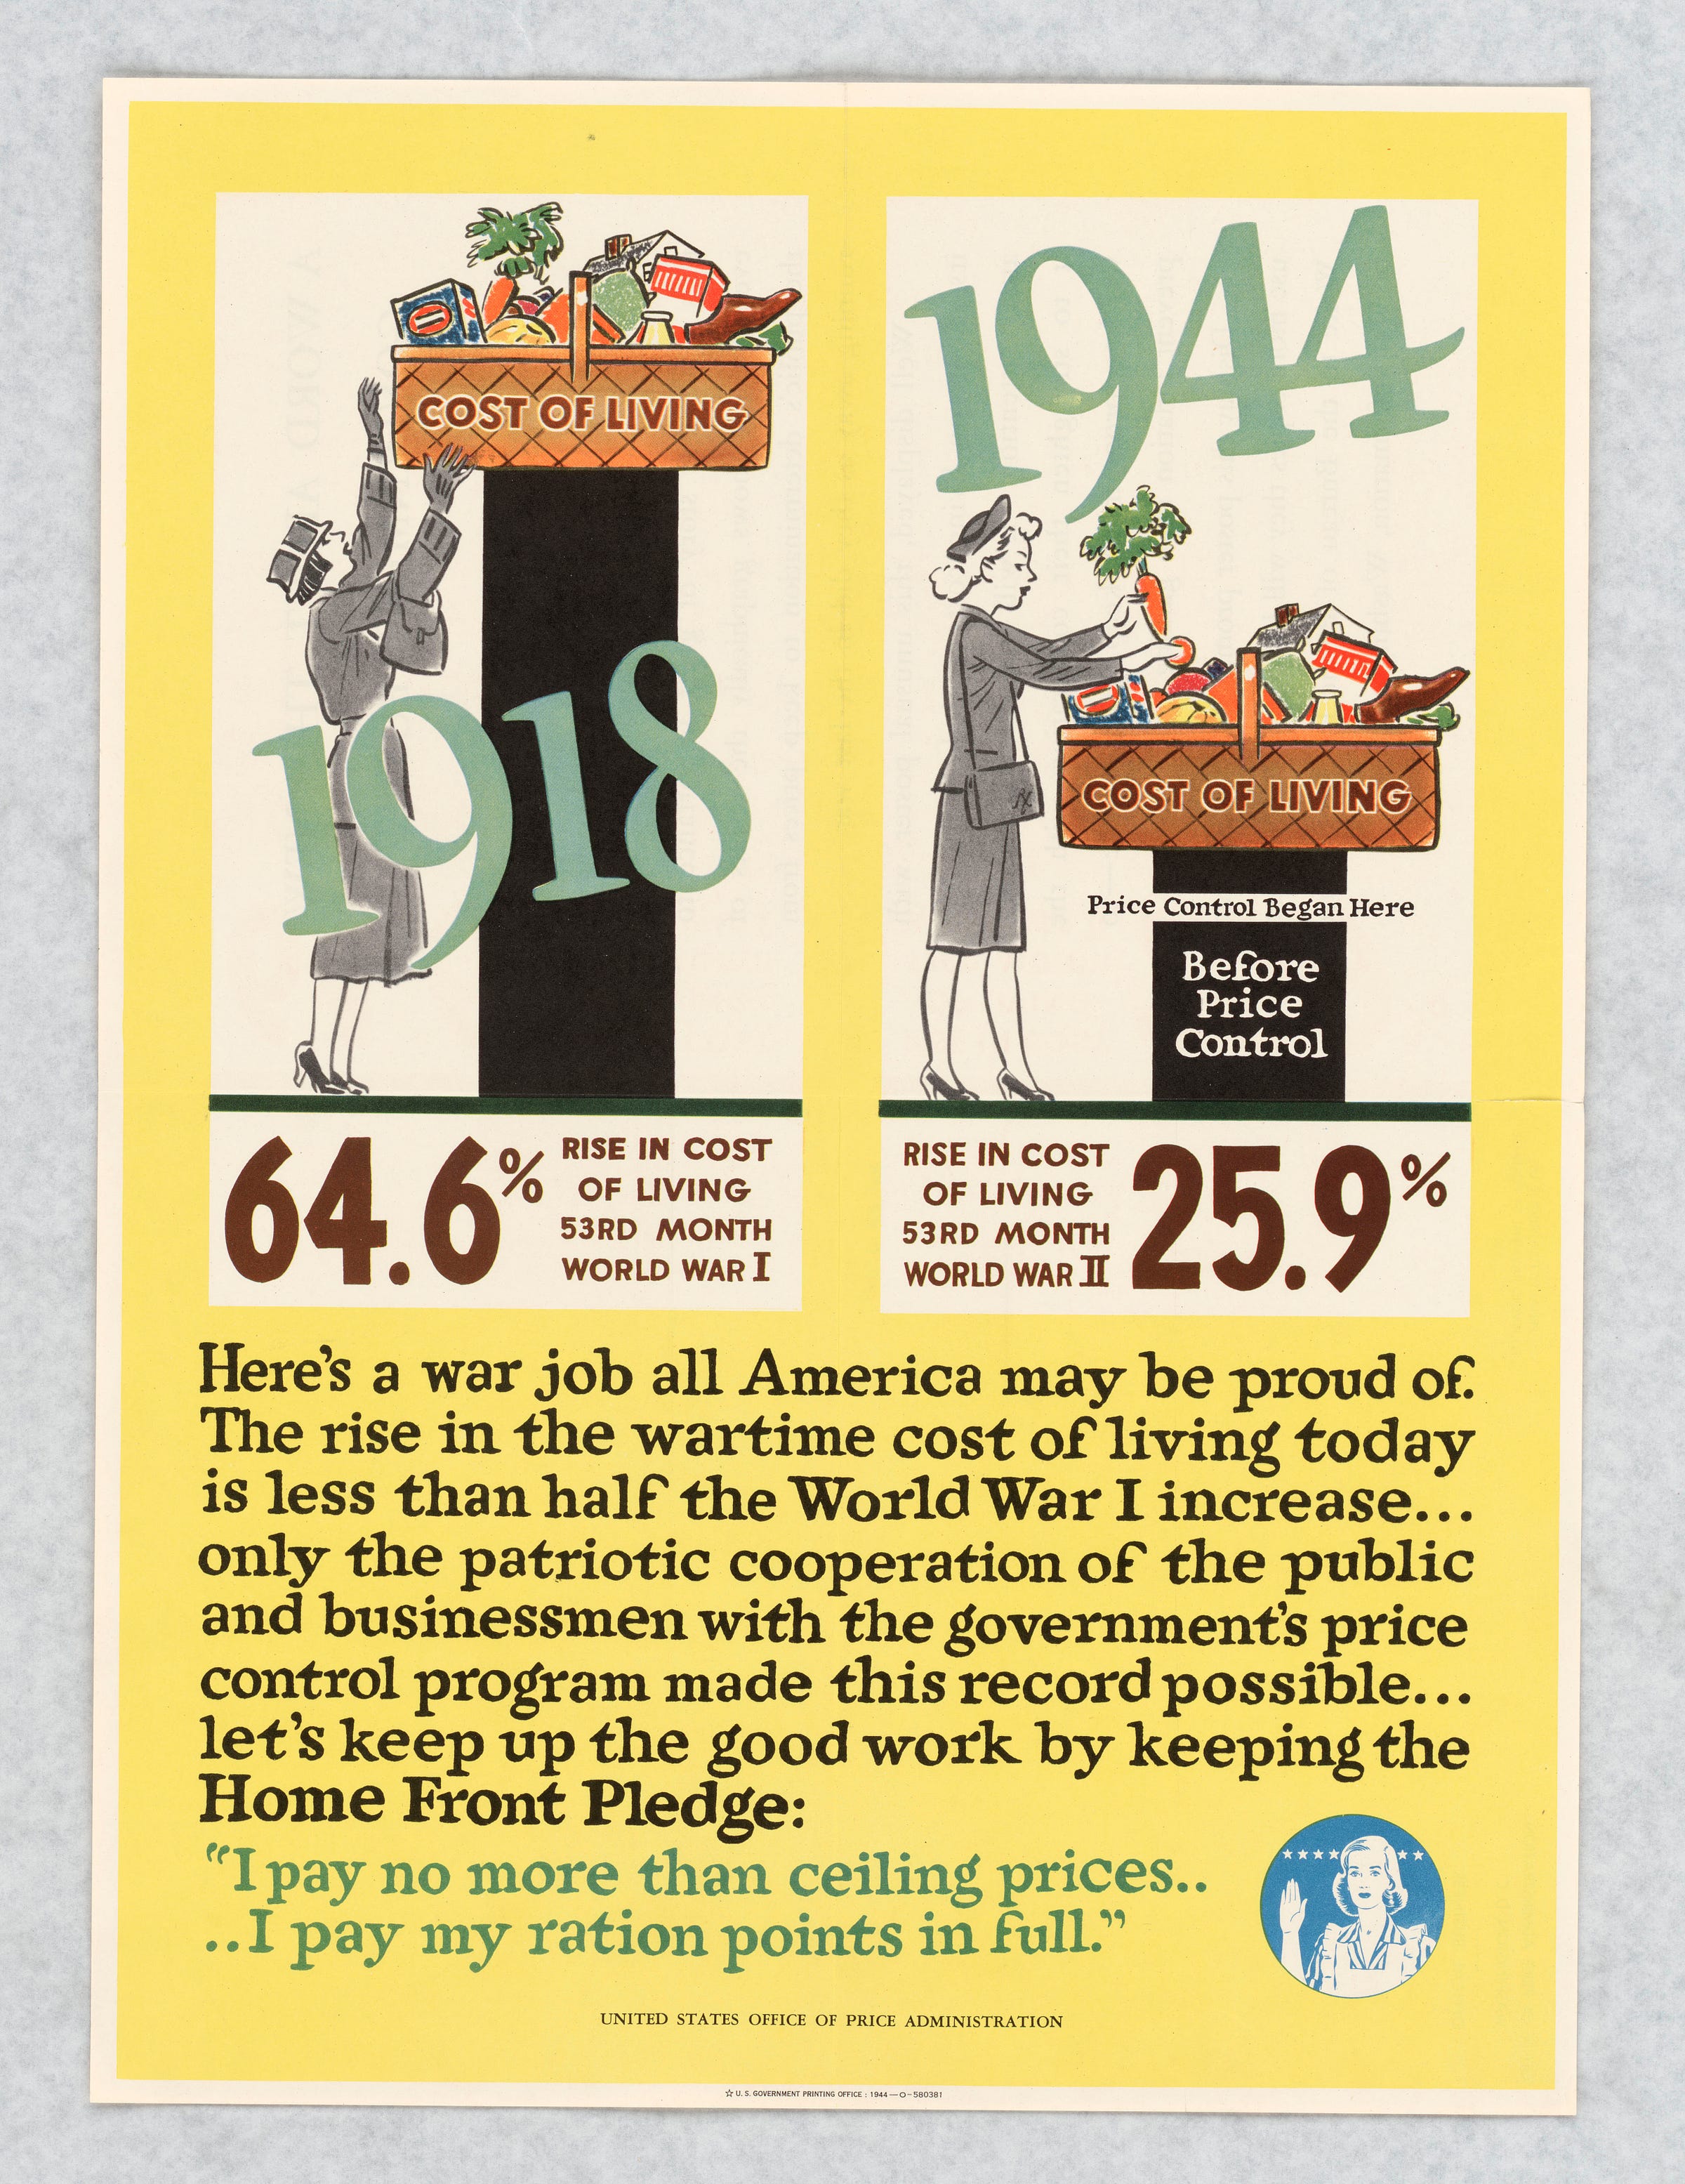 WWII propaganda poster shows "Cost of Living" grocery basket rising out of reach for a female shopper and 1944's within reach.